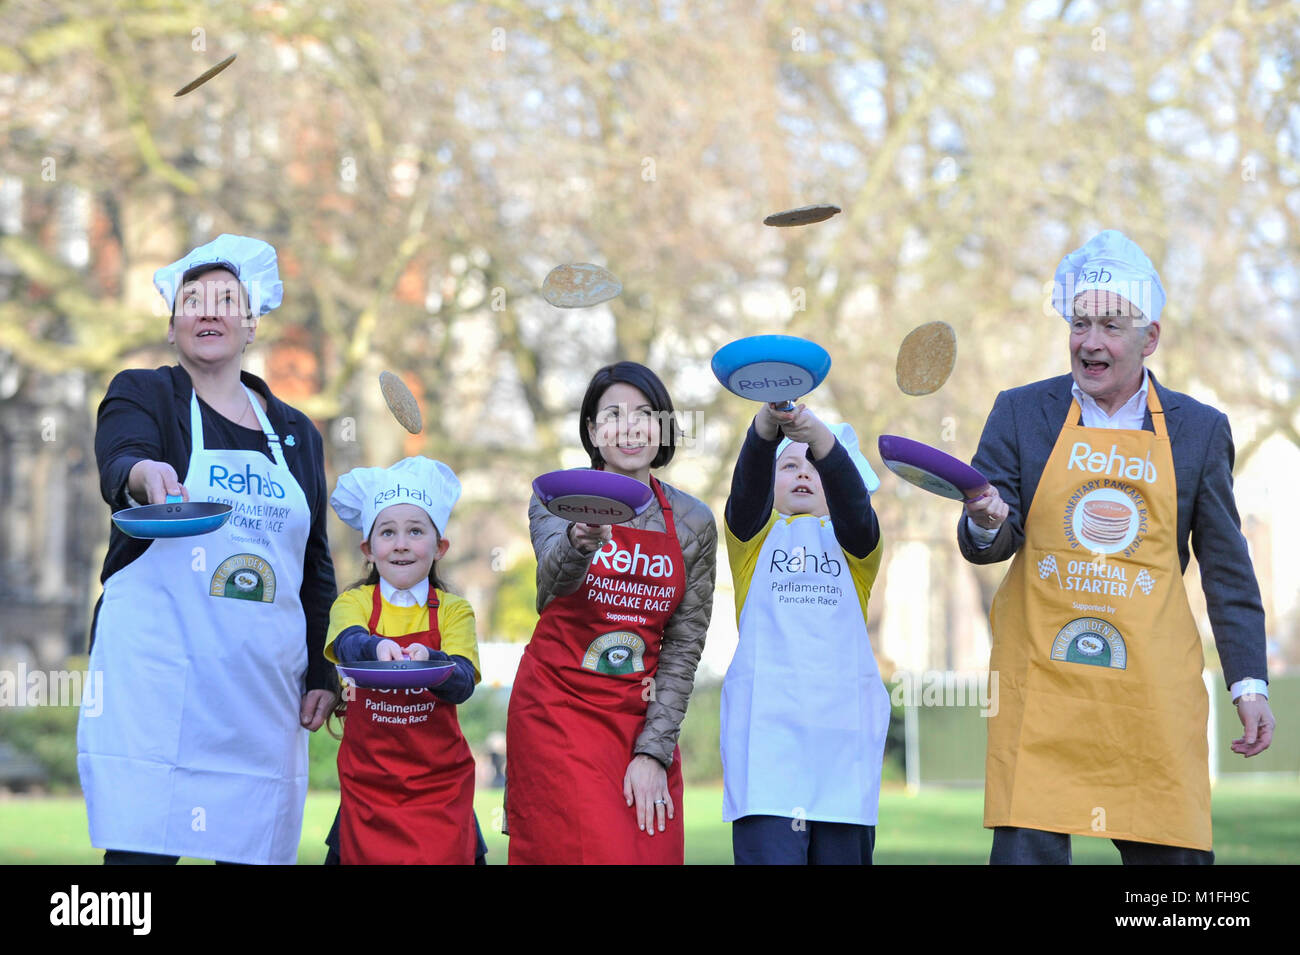 London, UK. 30th Jan, 2018. (L to R) Tonia Antoniazzi MP for the Parliament Team, and ITV News' Lucrezia Millarini for the Media Team, are joined by race veteran and this year's Official Starter, ITV newscaster, Alastair Stewart OBE, at a pancake race bootcamp in Westminster ahead of the main event, the Rehab Parliamentary Pancake Race, on Shrove Tuesday. They are joined by team mascots Grace and Jacob, both aged 8, from St Matthew's Primary School in Westminster. Credit: Stephen Chung/Alamy Live News Stock Photo